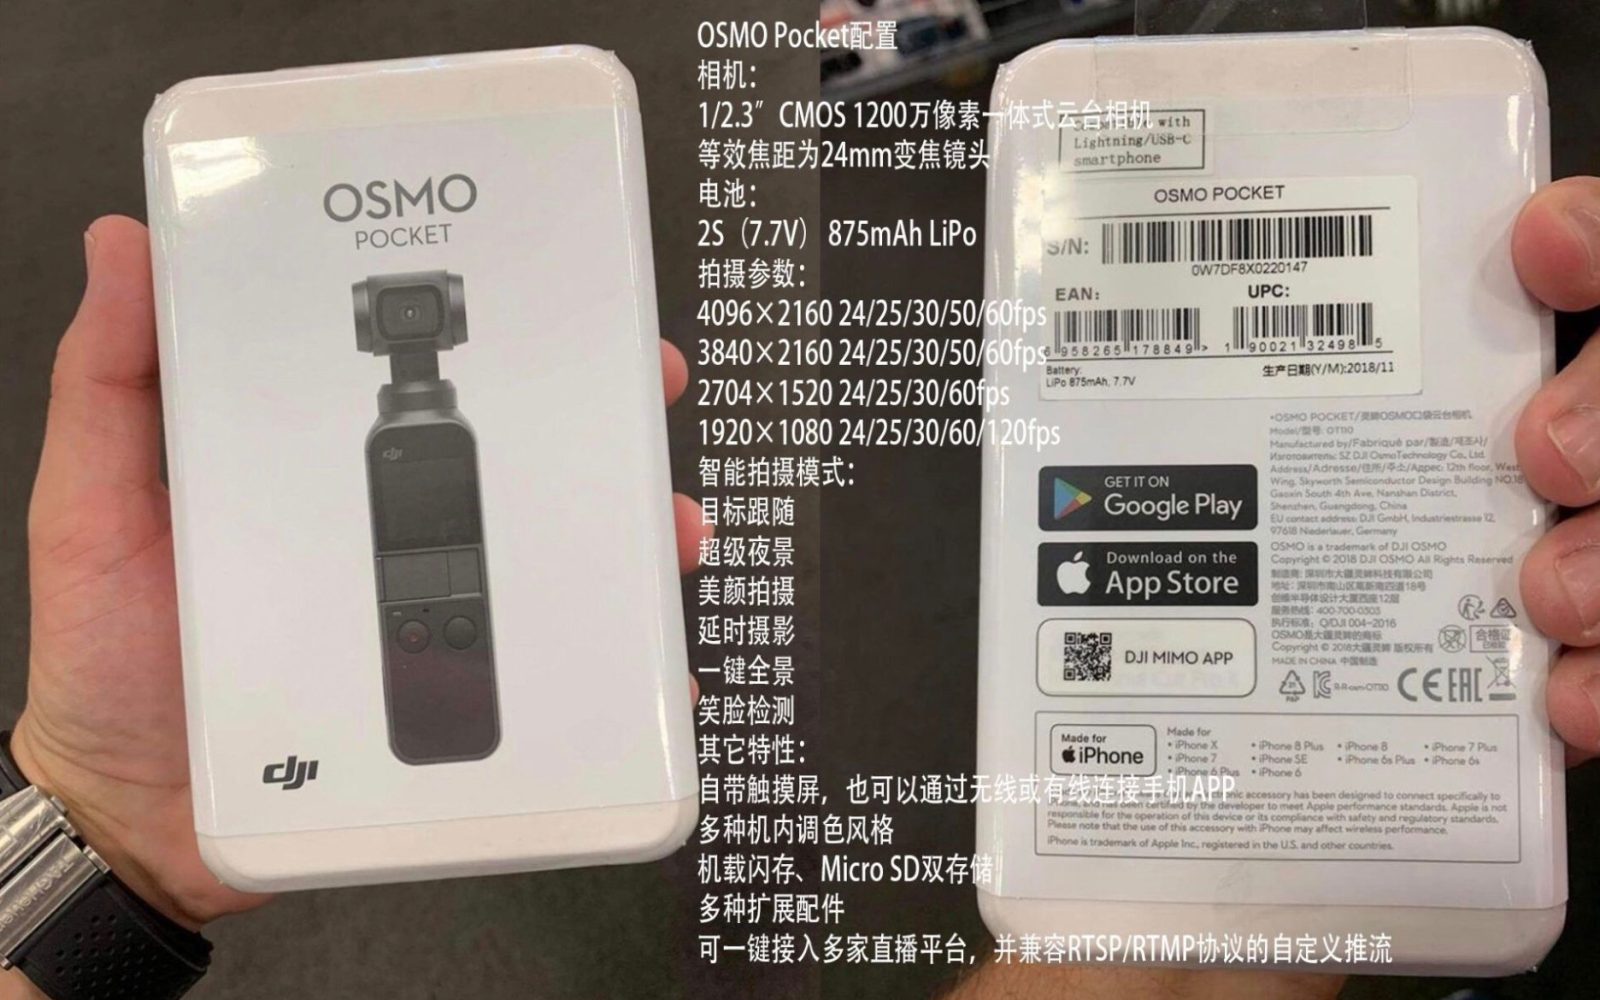 DJI Osmo Pocket accessories and specs - 4K at 60fps.